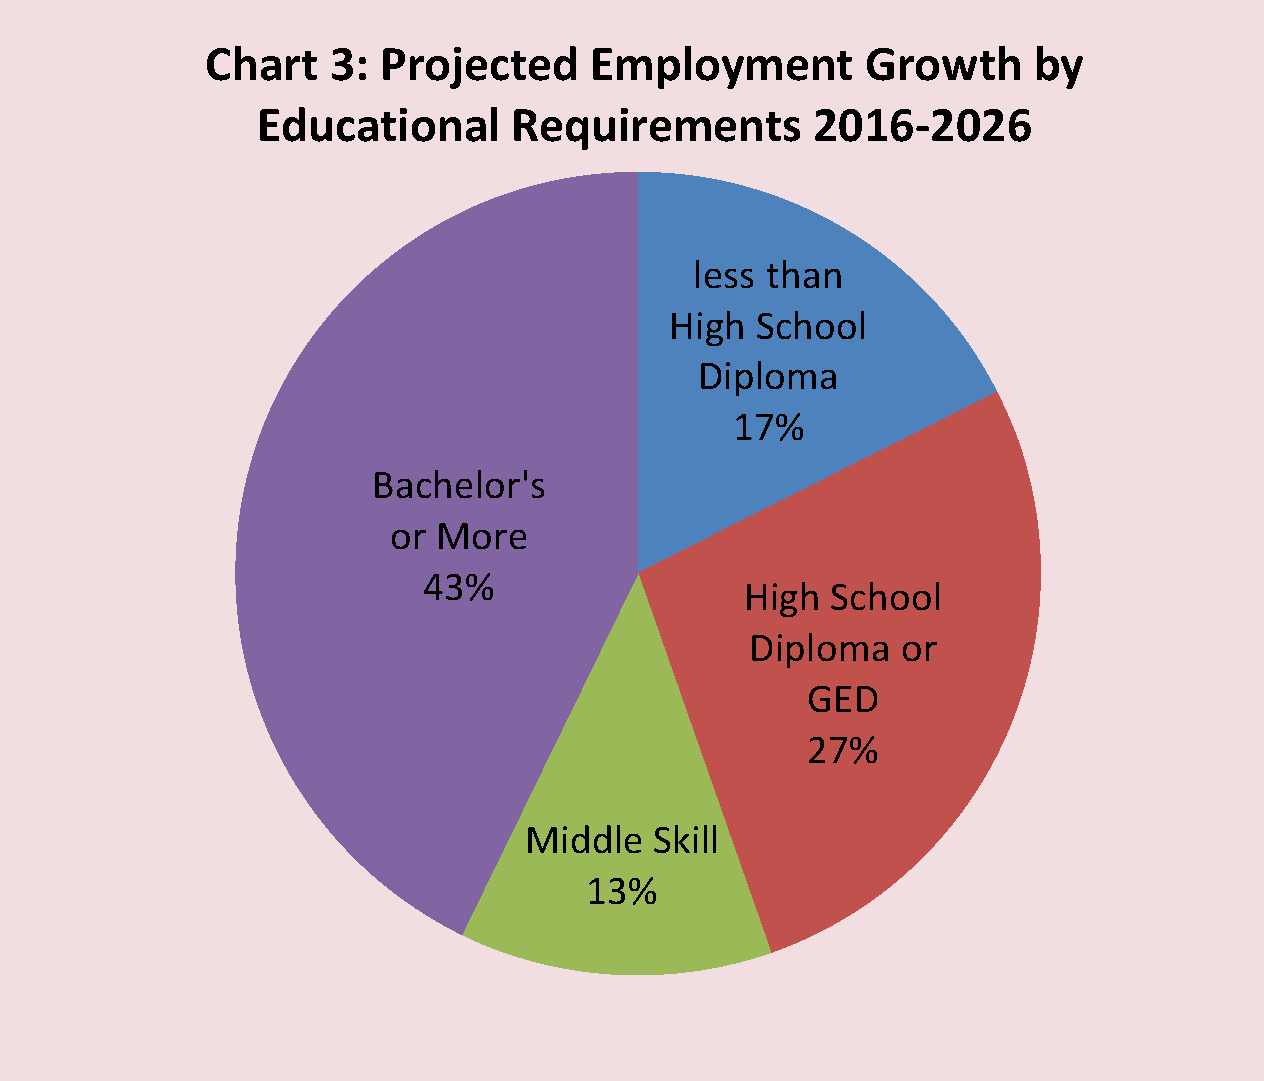 Chart 3: Projected Employment Growth by Educational Requirements 2016-2026